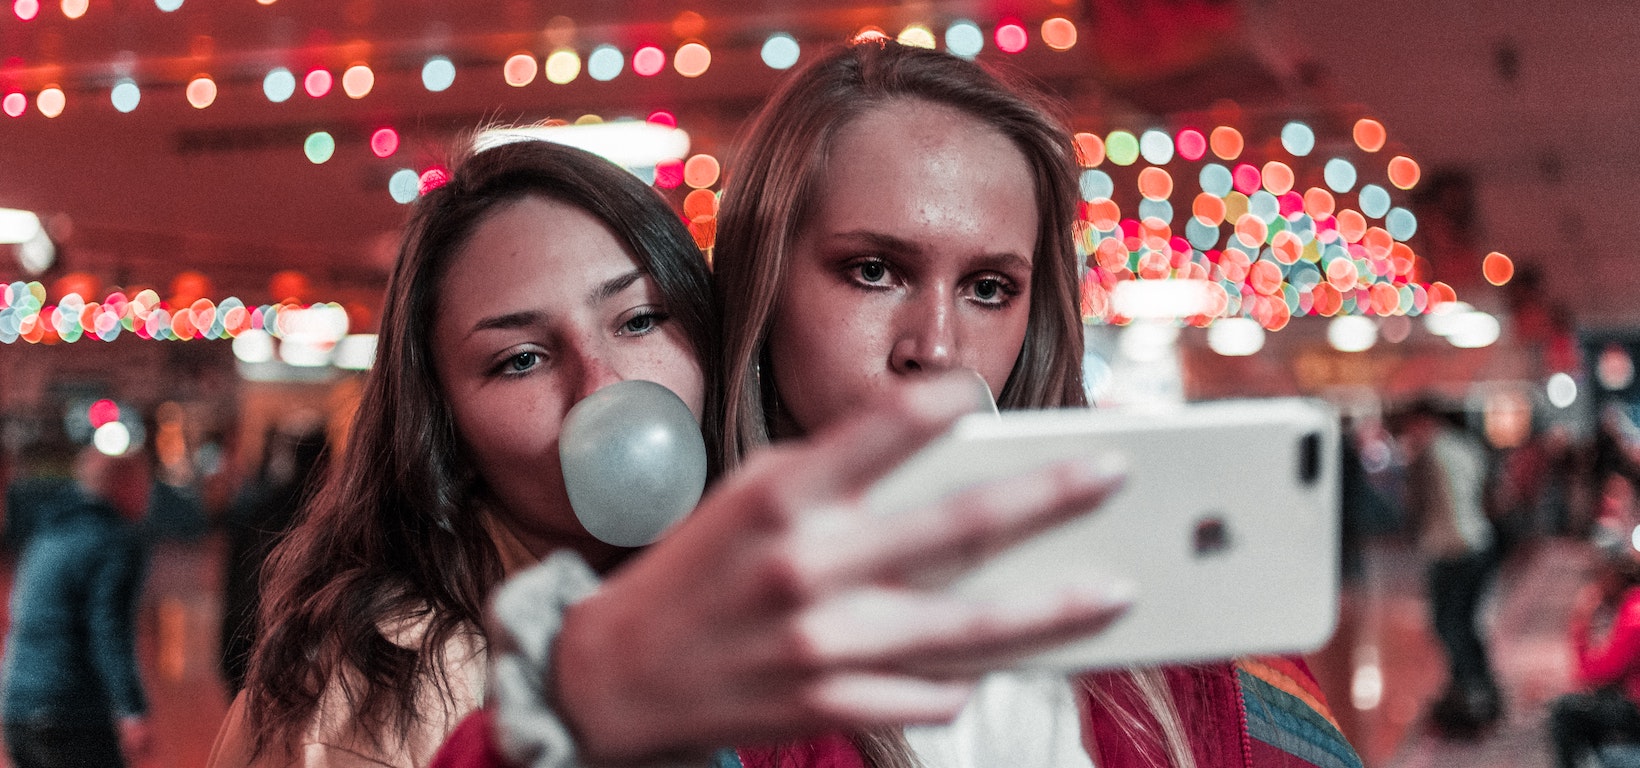 Gen Z is Changing the Future of Digital Marketing with these Top 3 Trends